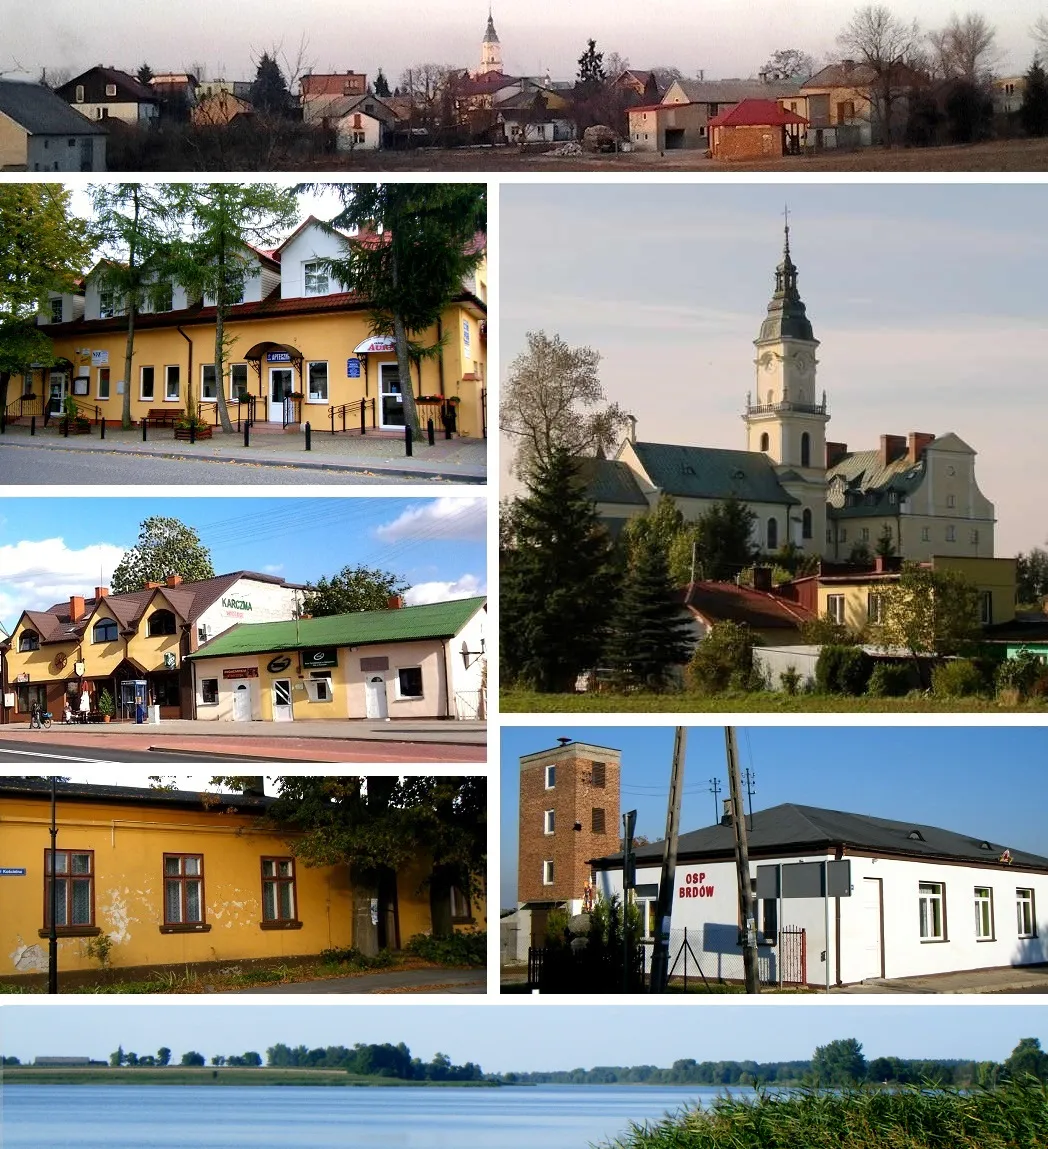 Photo showing: Brdów - village in central Poland: Brdów panorama, Health Center, St Adalbert's church, Restaurant/bank/shops, building of the Society of Friends of the Earth of Brdów, Fire Department, Lake Brdowskie.